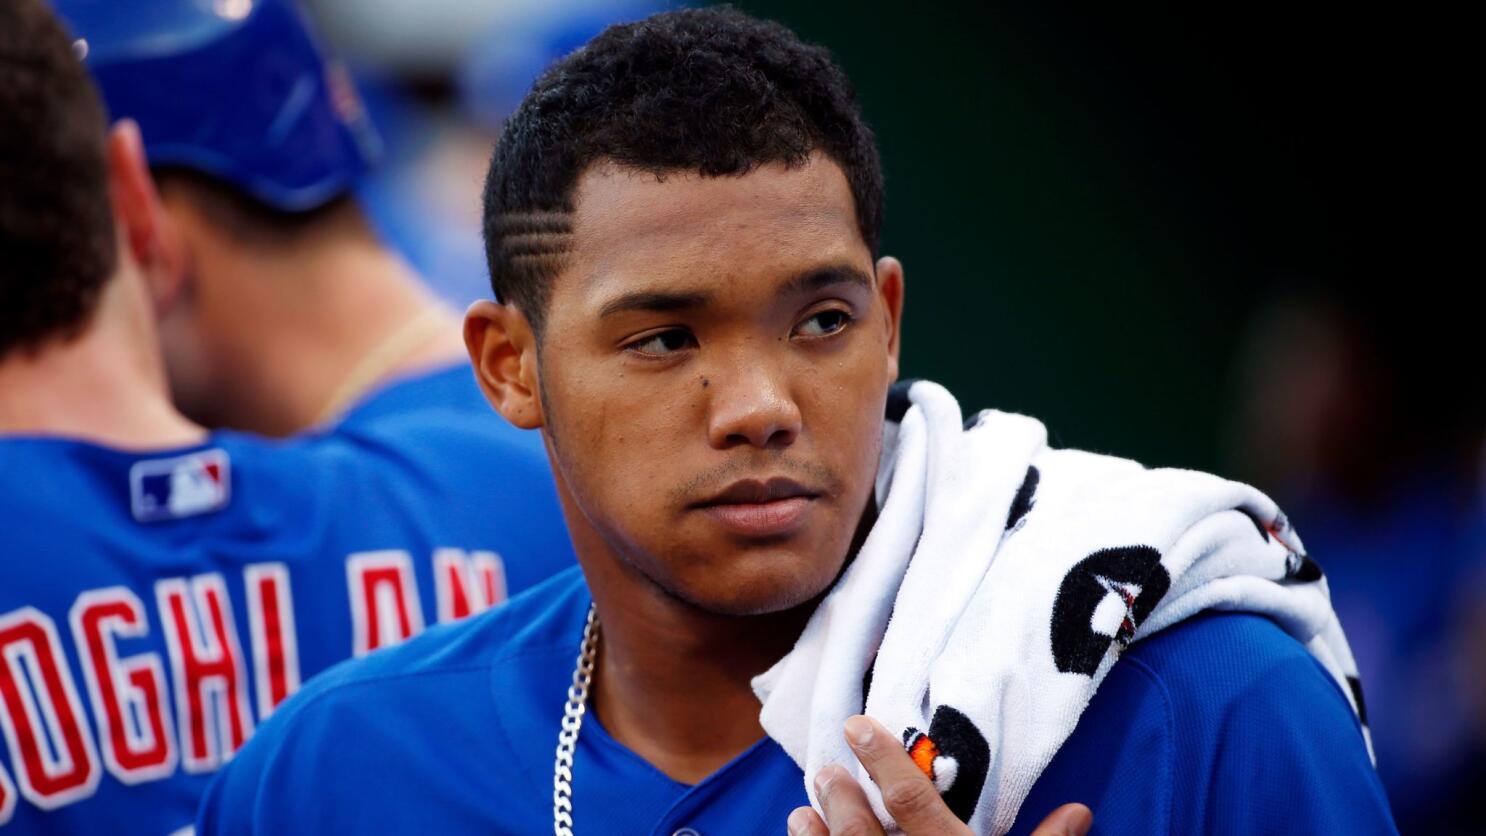 Addison Russell returns to Cubs as MLB investigates abuse allegation - Los  Angeles Times